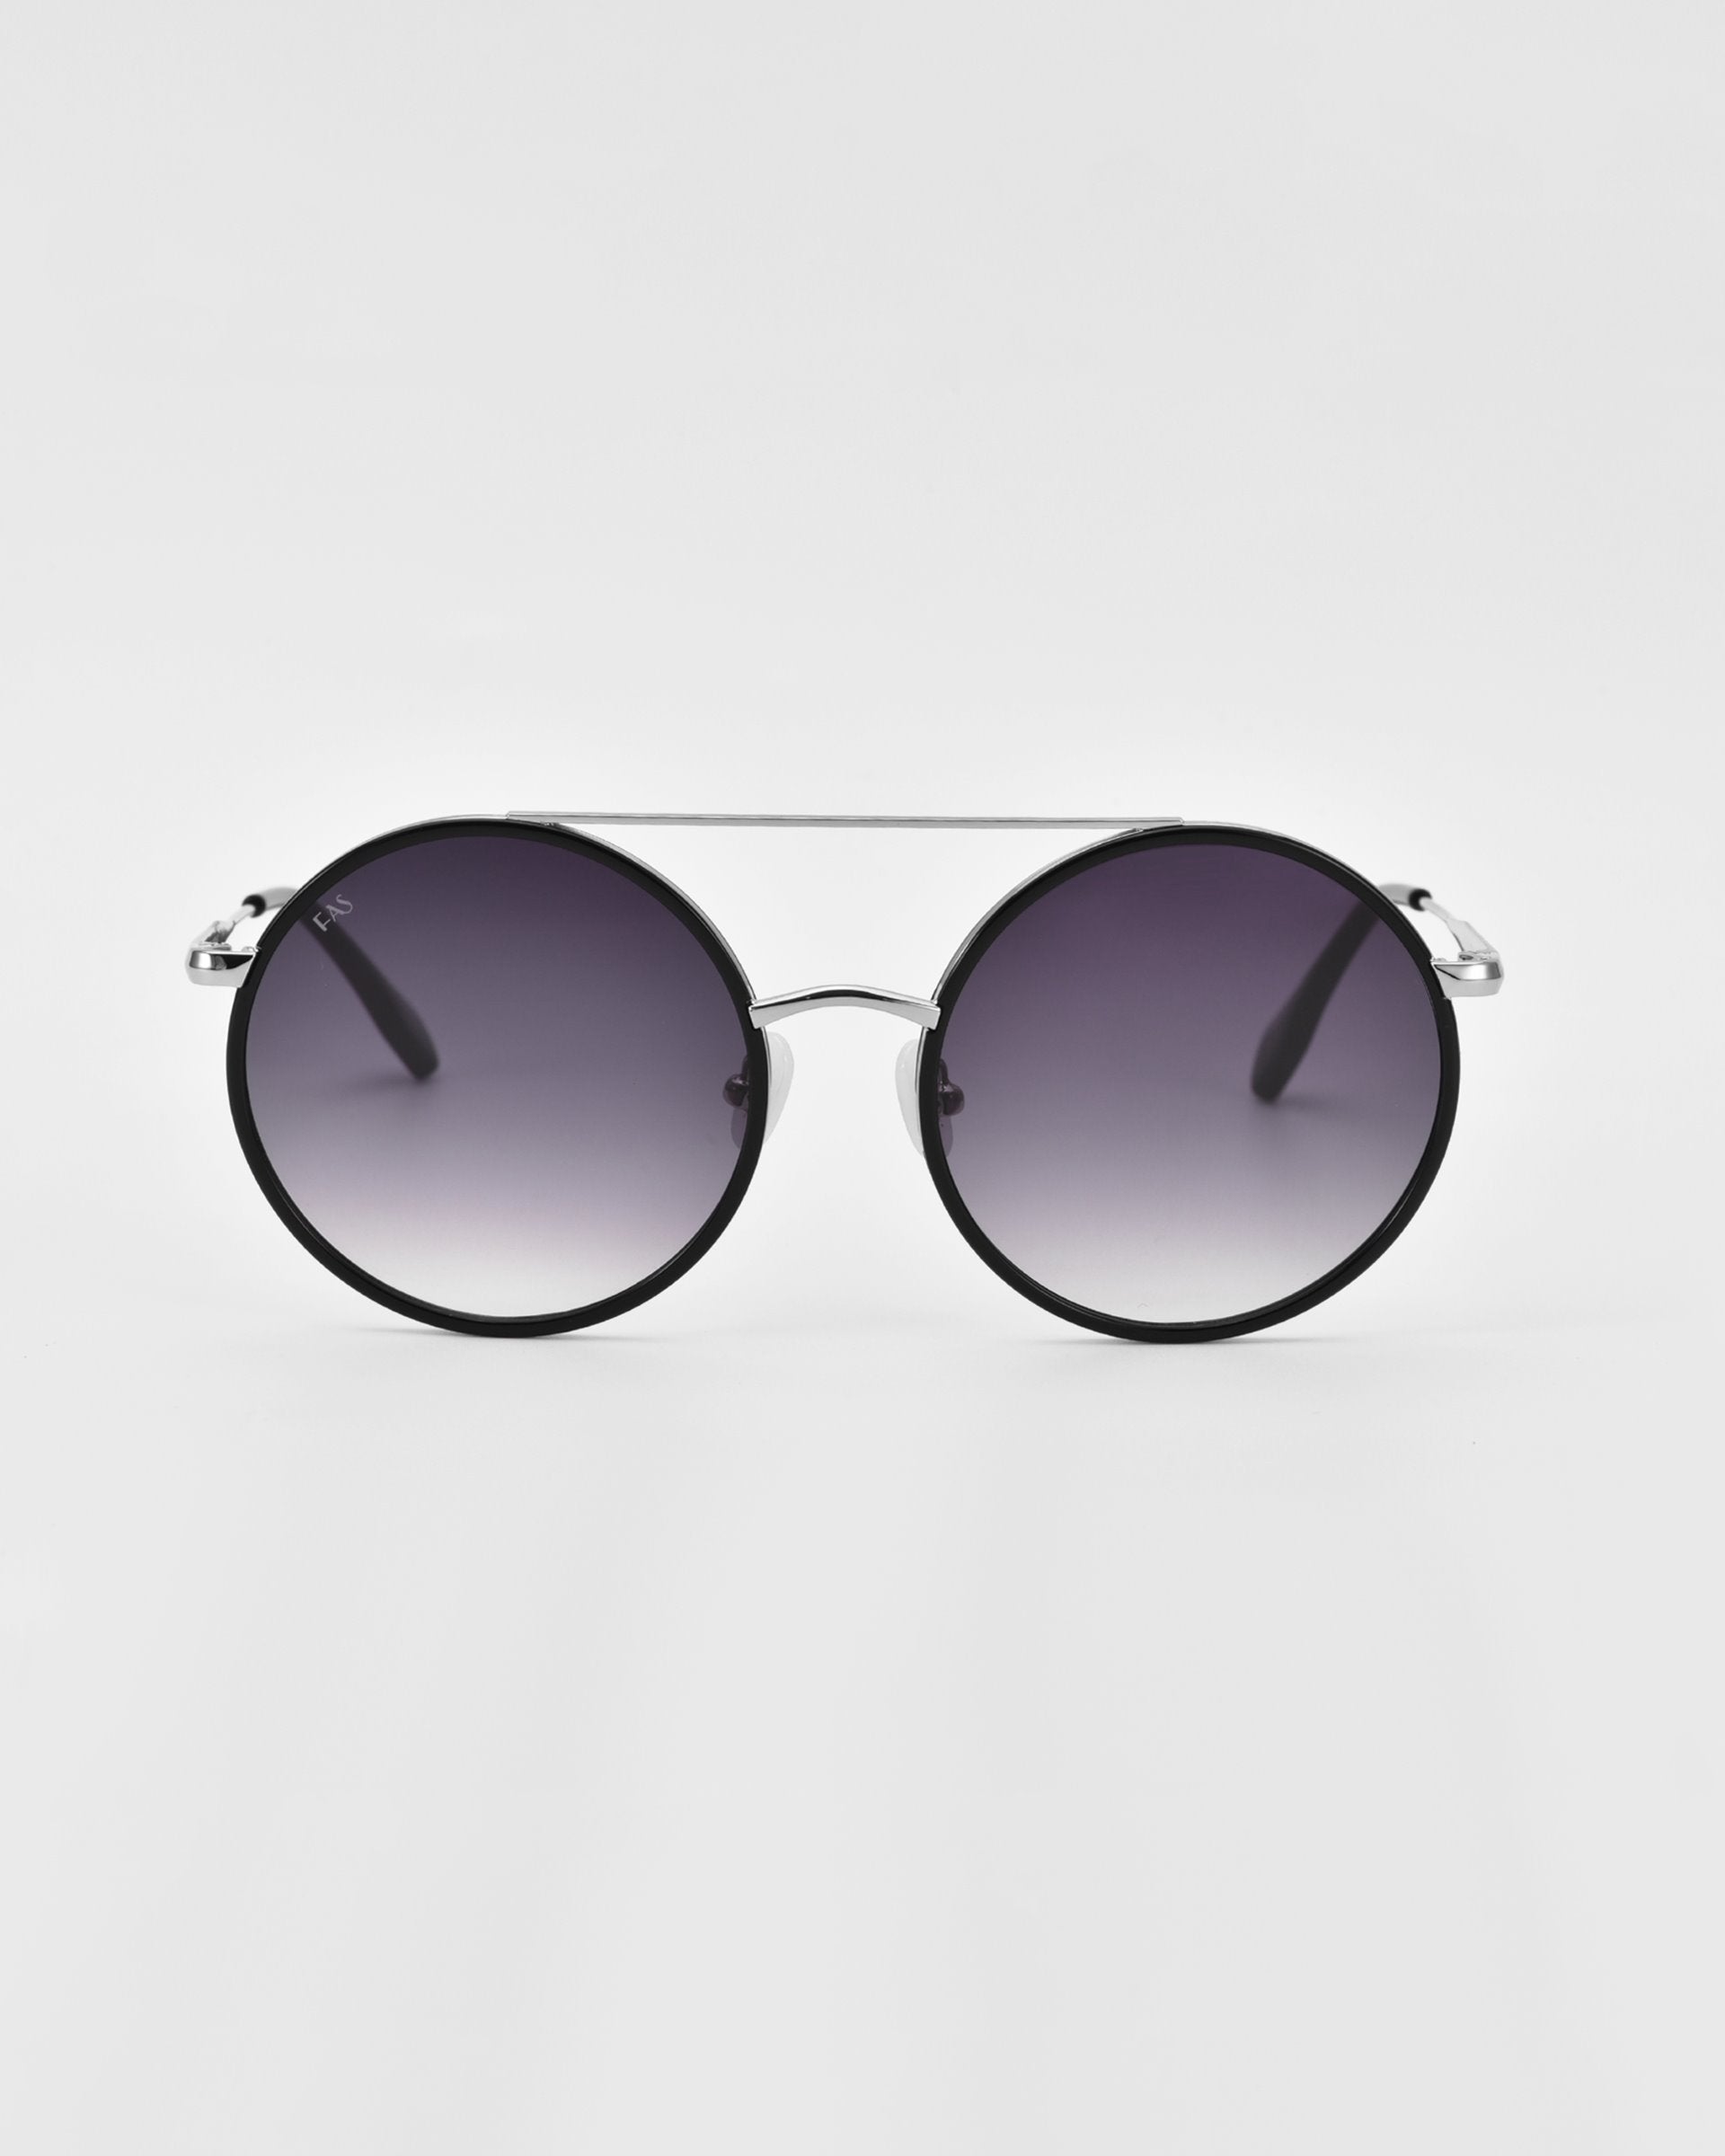 A pair of oversized round aviator sunglasses with gradient lenses, a black frame, and a thin silver bridge displayed against a plain white background. The design is minimalistic and modern, with sleek gold and silver-tone metal accents for a stylish appearance. The product is called Orb by For Art's Sake®.